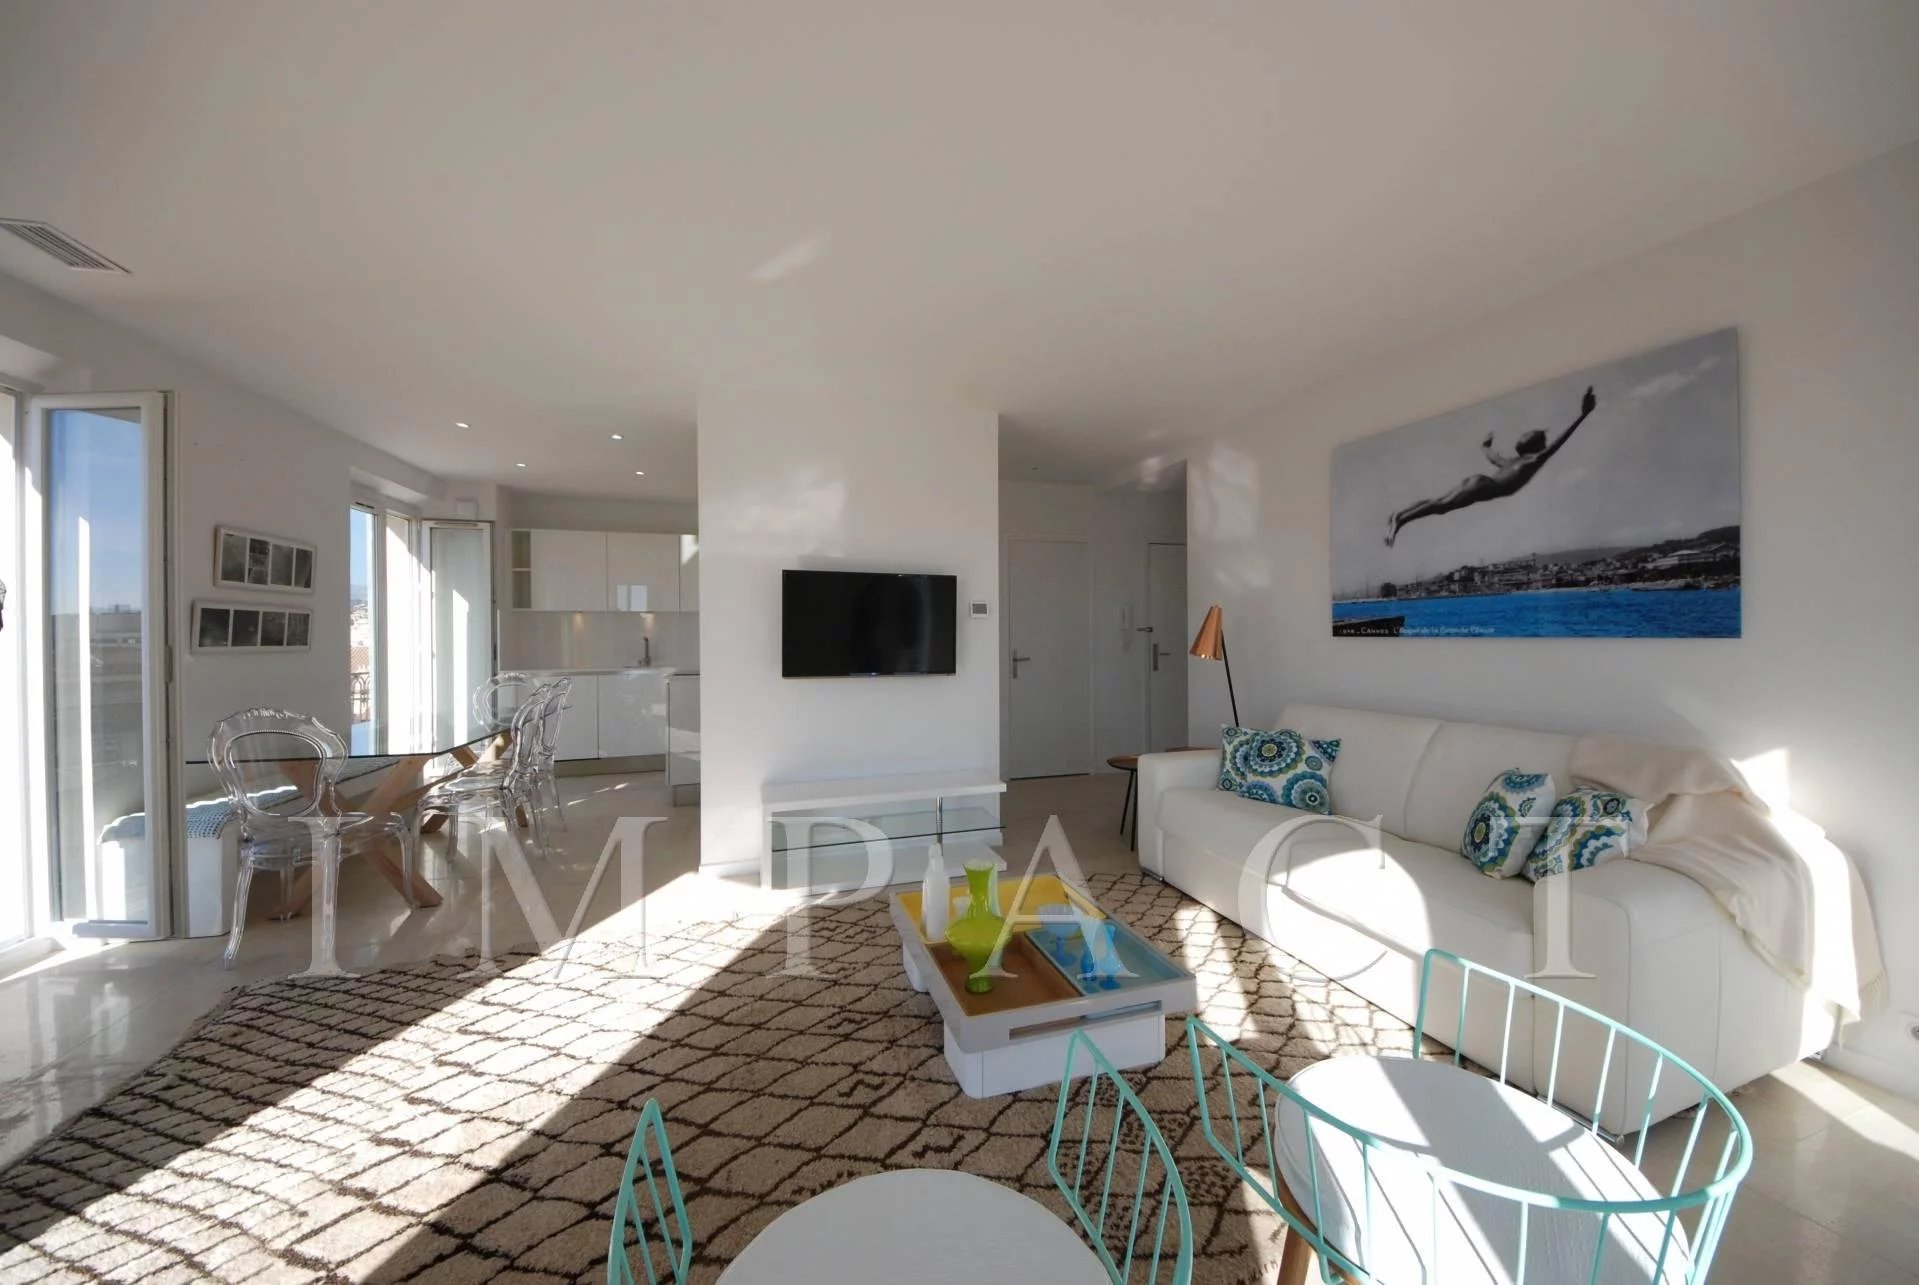 Apartment to rent in the center of Cannes